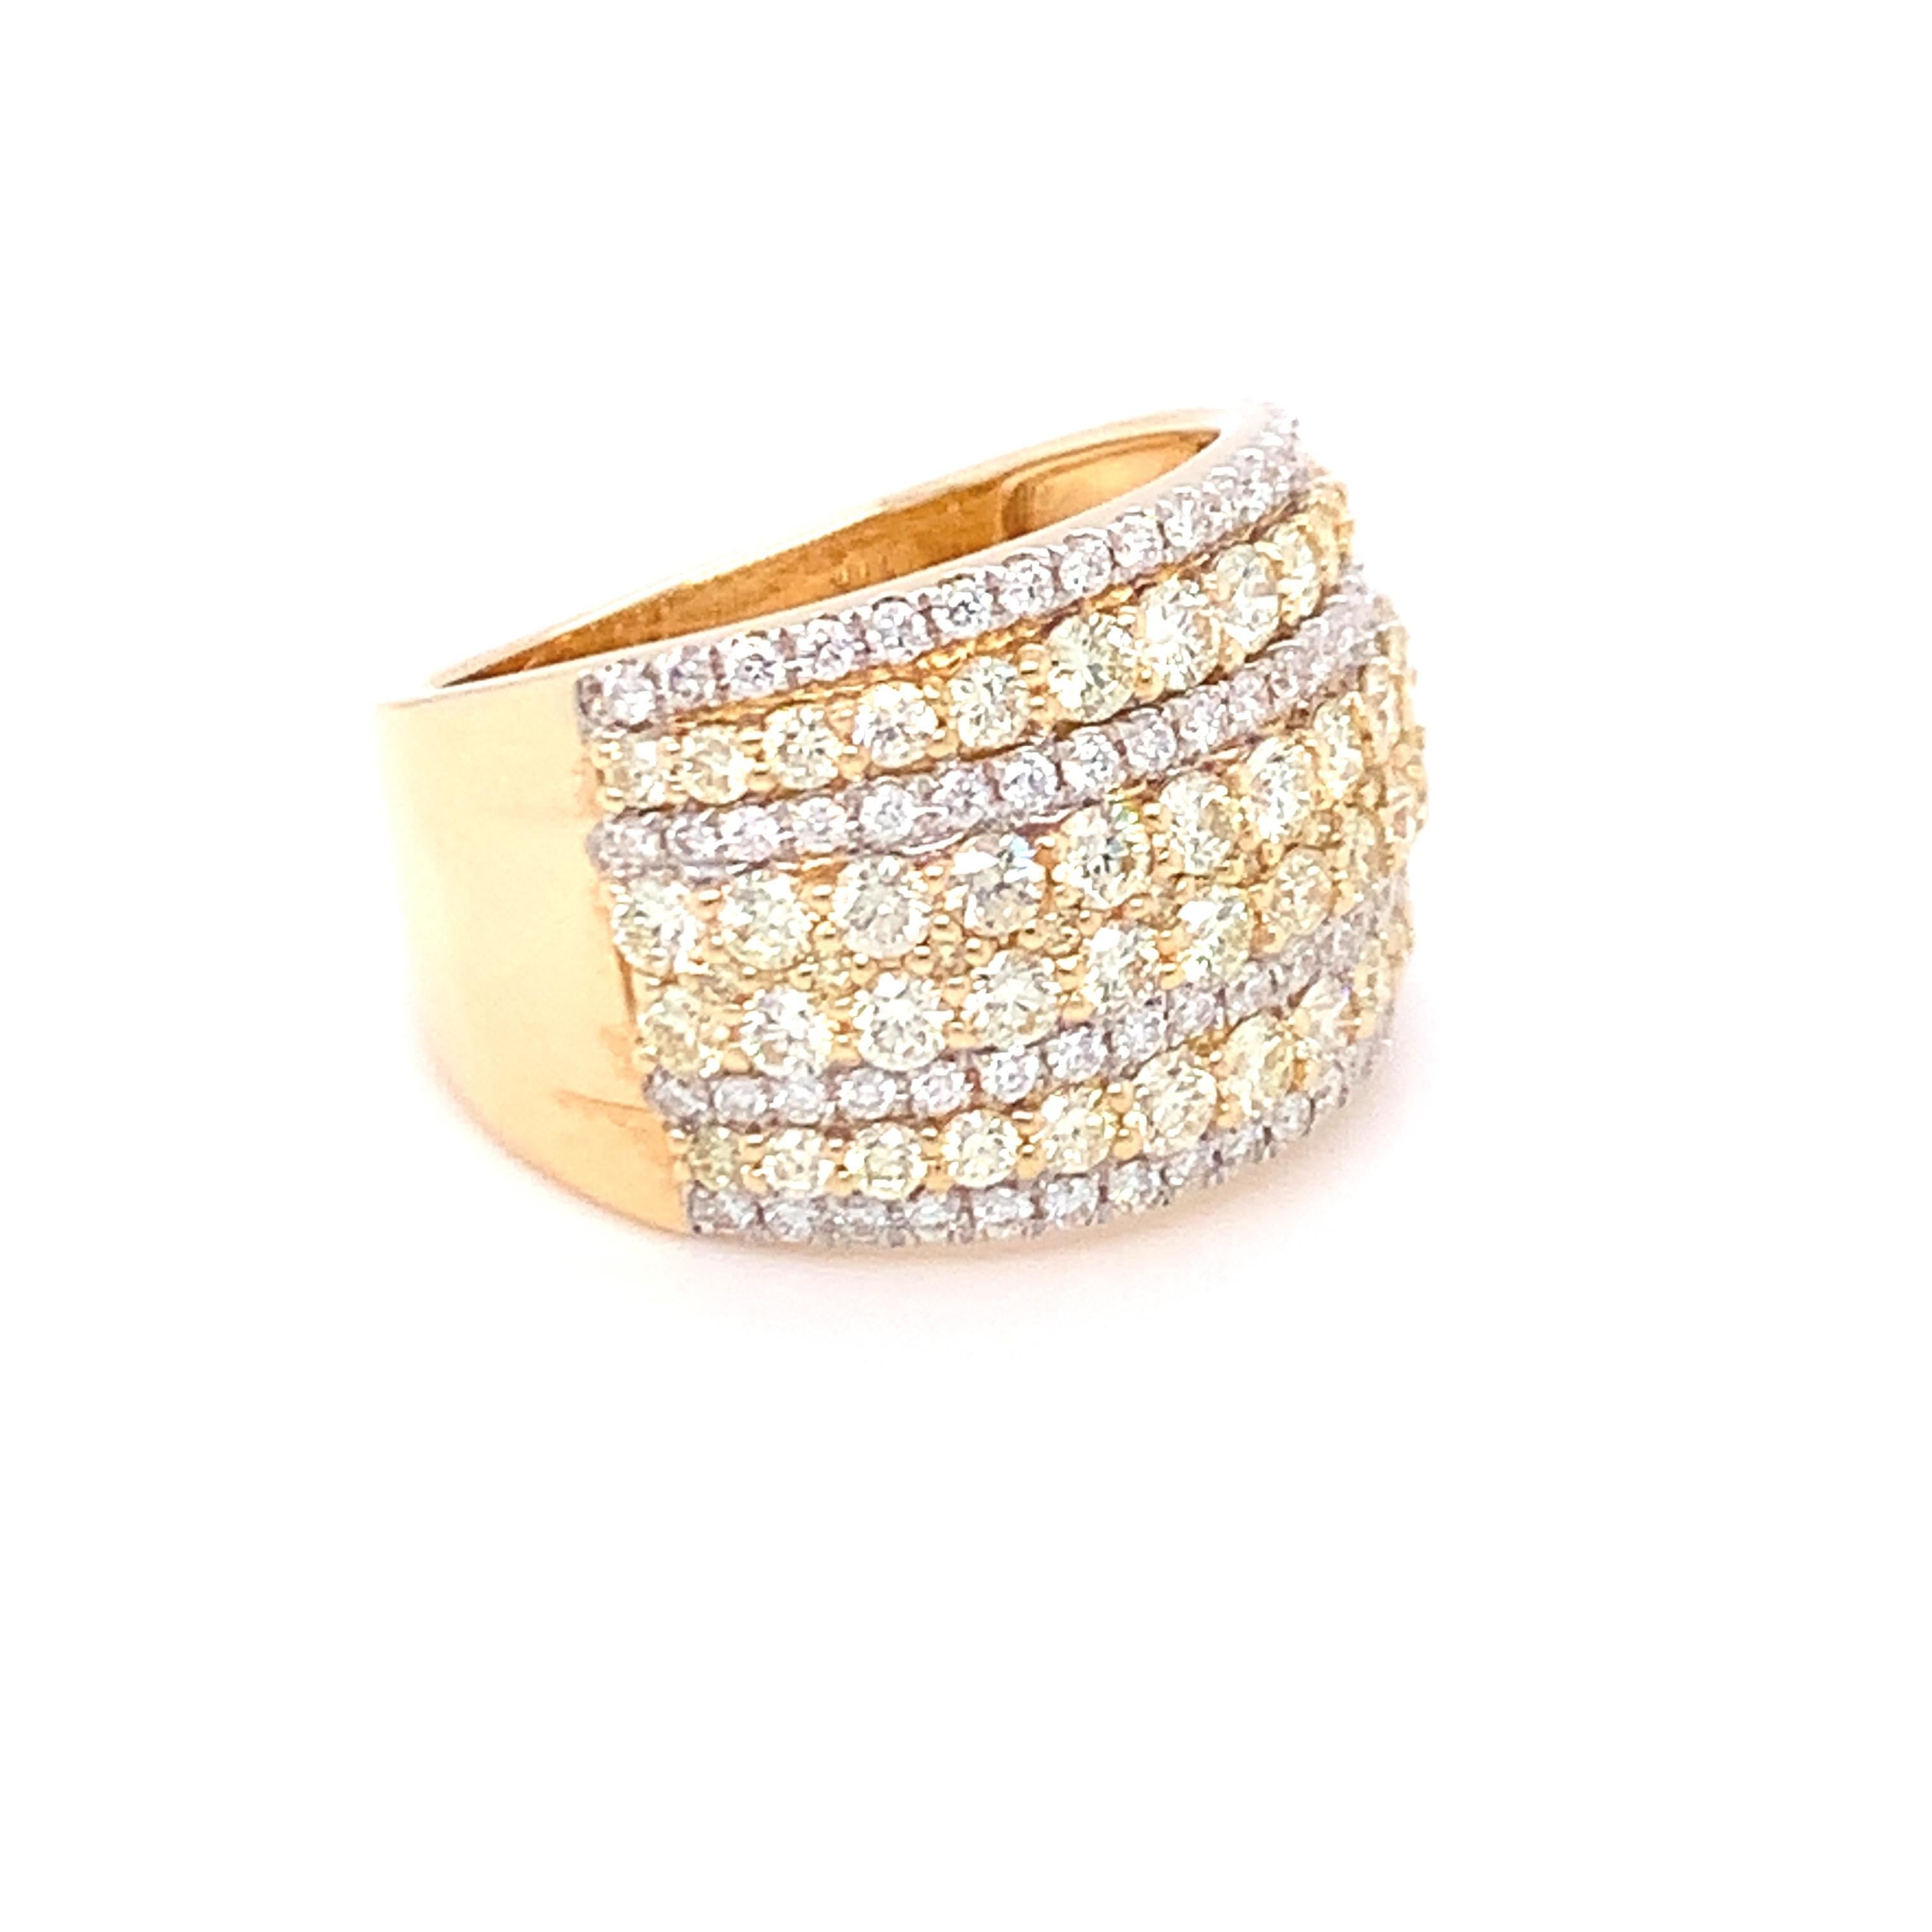 A combination of yellow and white diamond in eight rows makes this band a stunning piece of jewelry. Set in yellow gold and finished with skilled hands.
Yellow Diamond: 1.65ct
White Diamond: 0.43ct
Gold: 14K Yellow
Ring Size:7